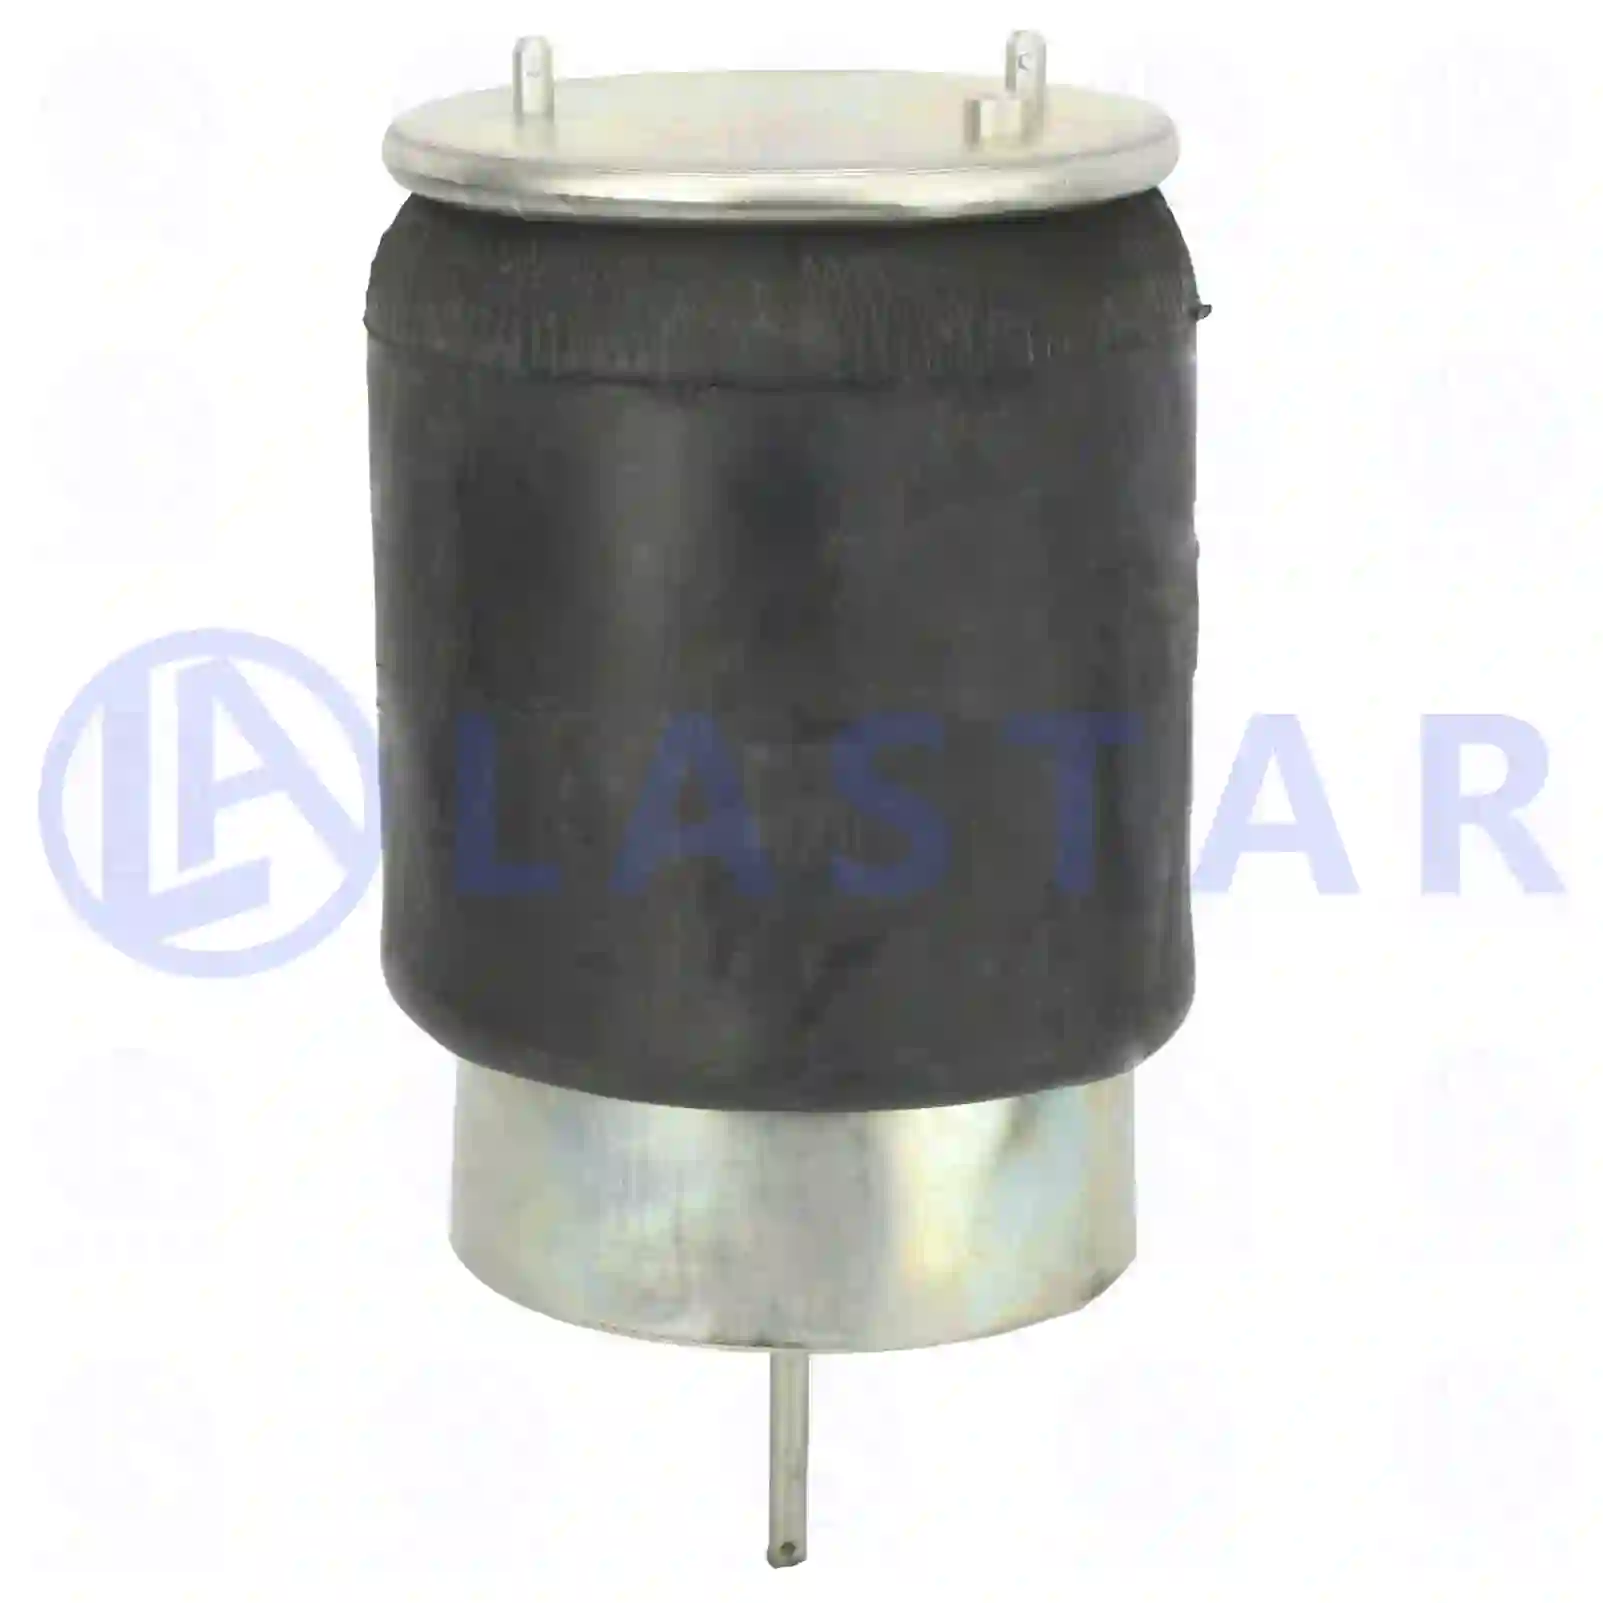 Air spring, with steel piston, 77727070, 1440306, 492678, ZG40740-0008, ||  77727070 Lastar Spare Part | Truck Spare Parts, Auotomotive Spare Parts Air spring, with steel piston, 77727070, 1440306, 492678, ZG40740-0008, ||  77727070 Lastar Spare Part | Truck Spare Parts, Auotomotive Spare Parts